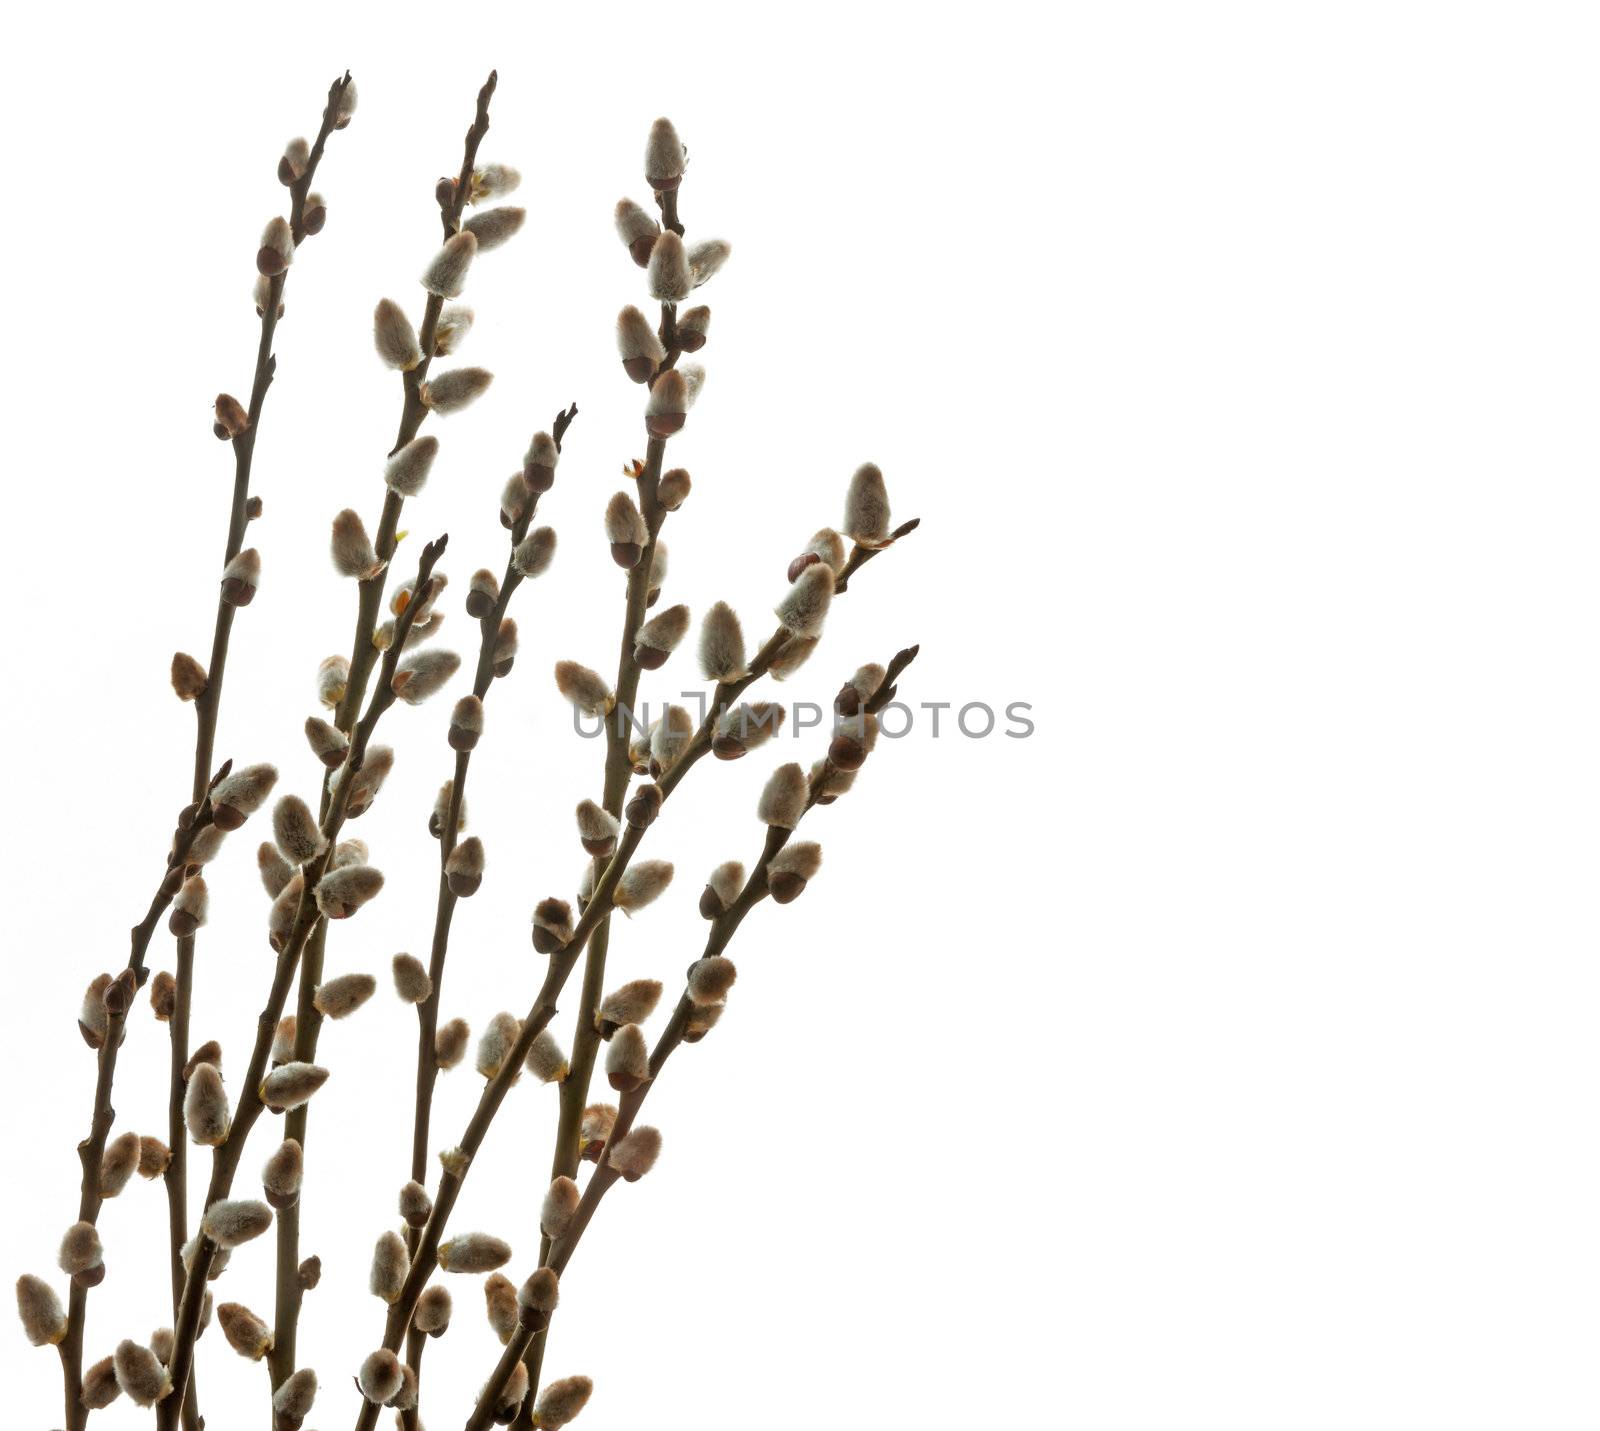 Branches of a willow on white background by vladimir_sklyarov